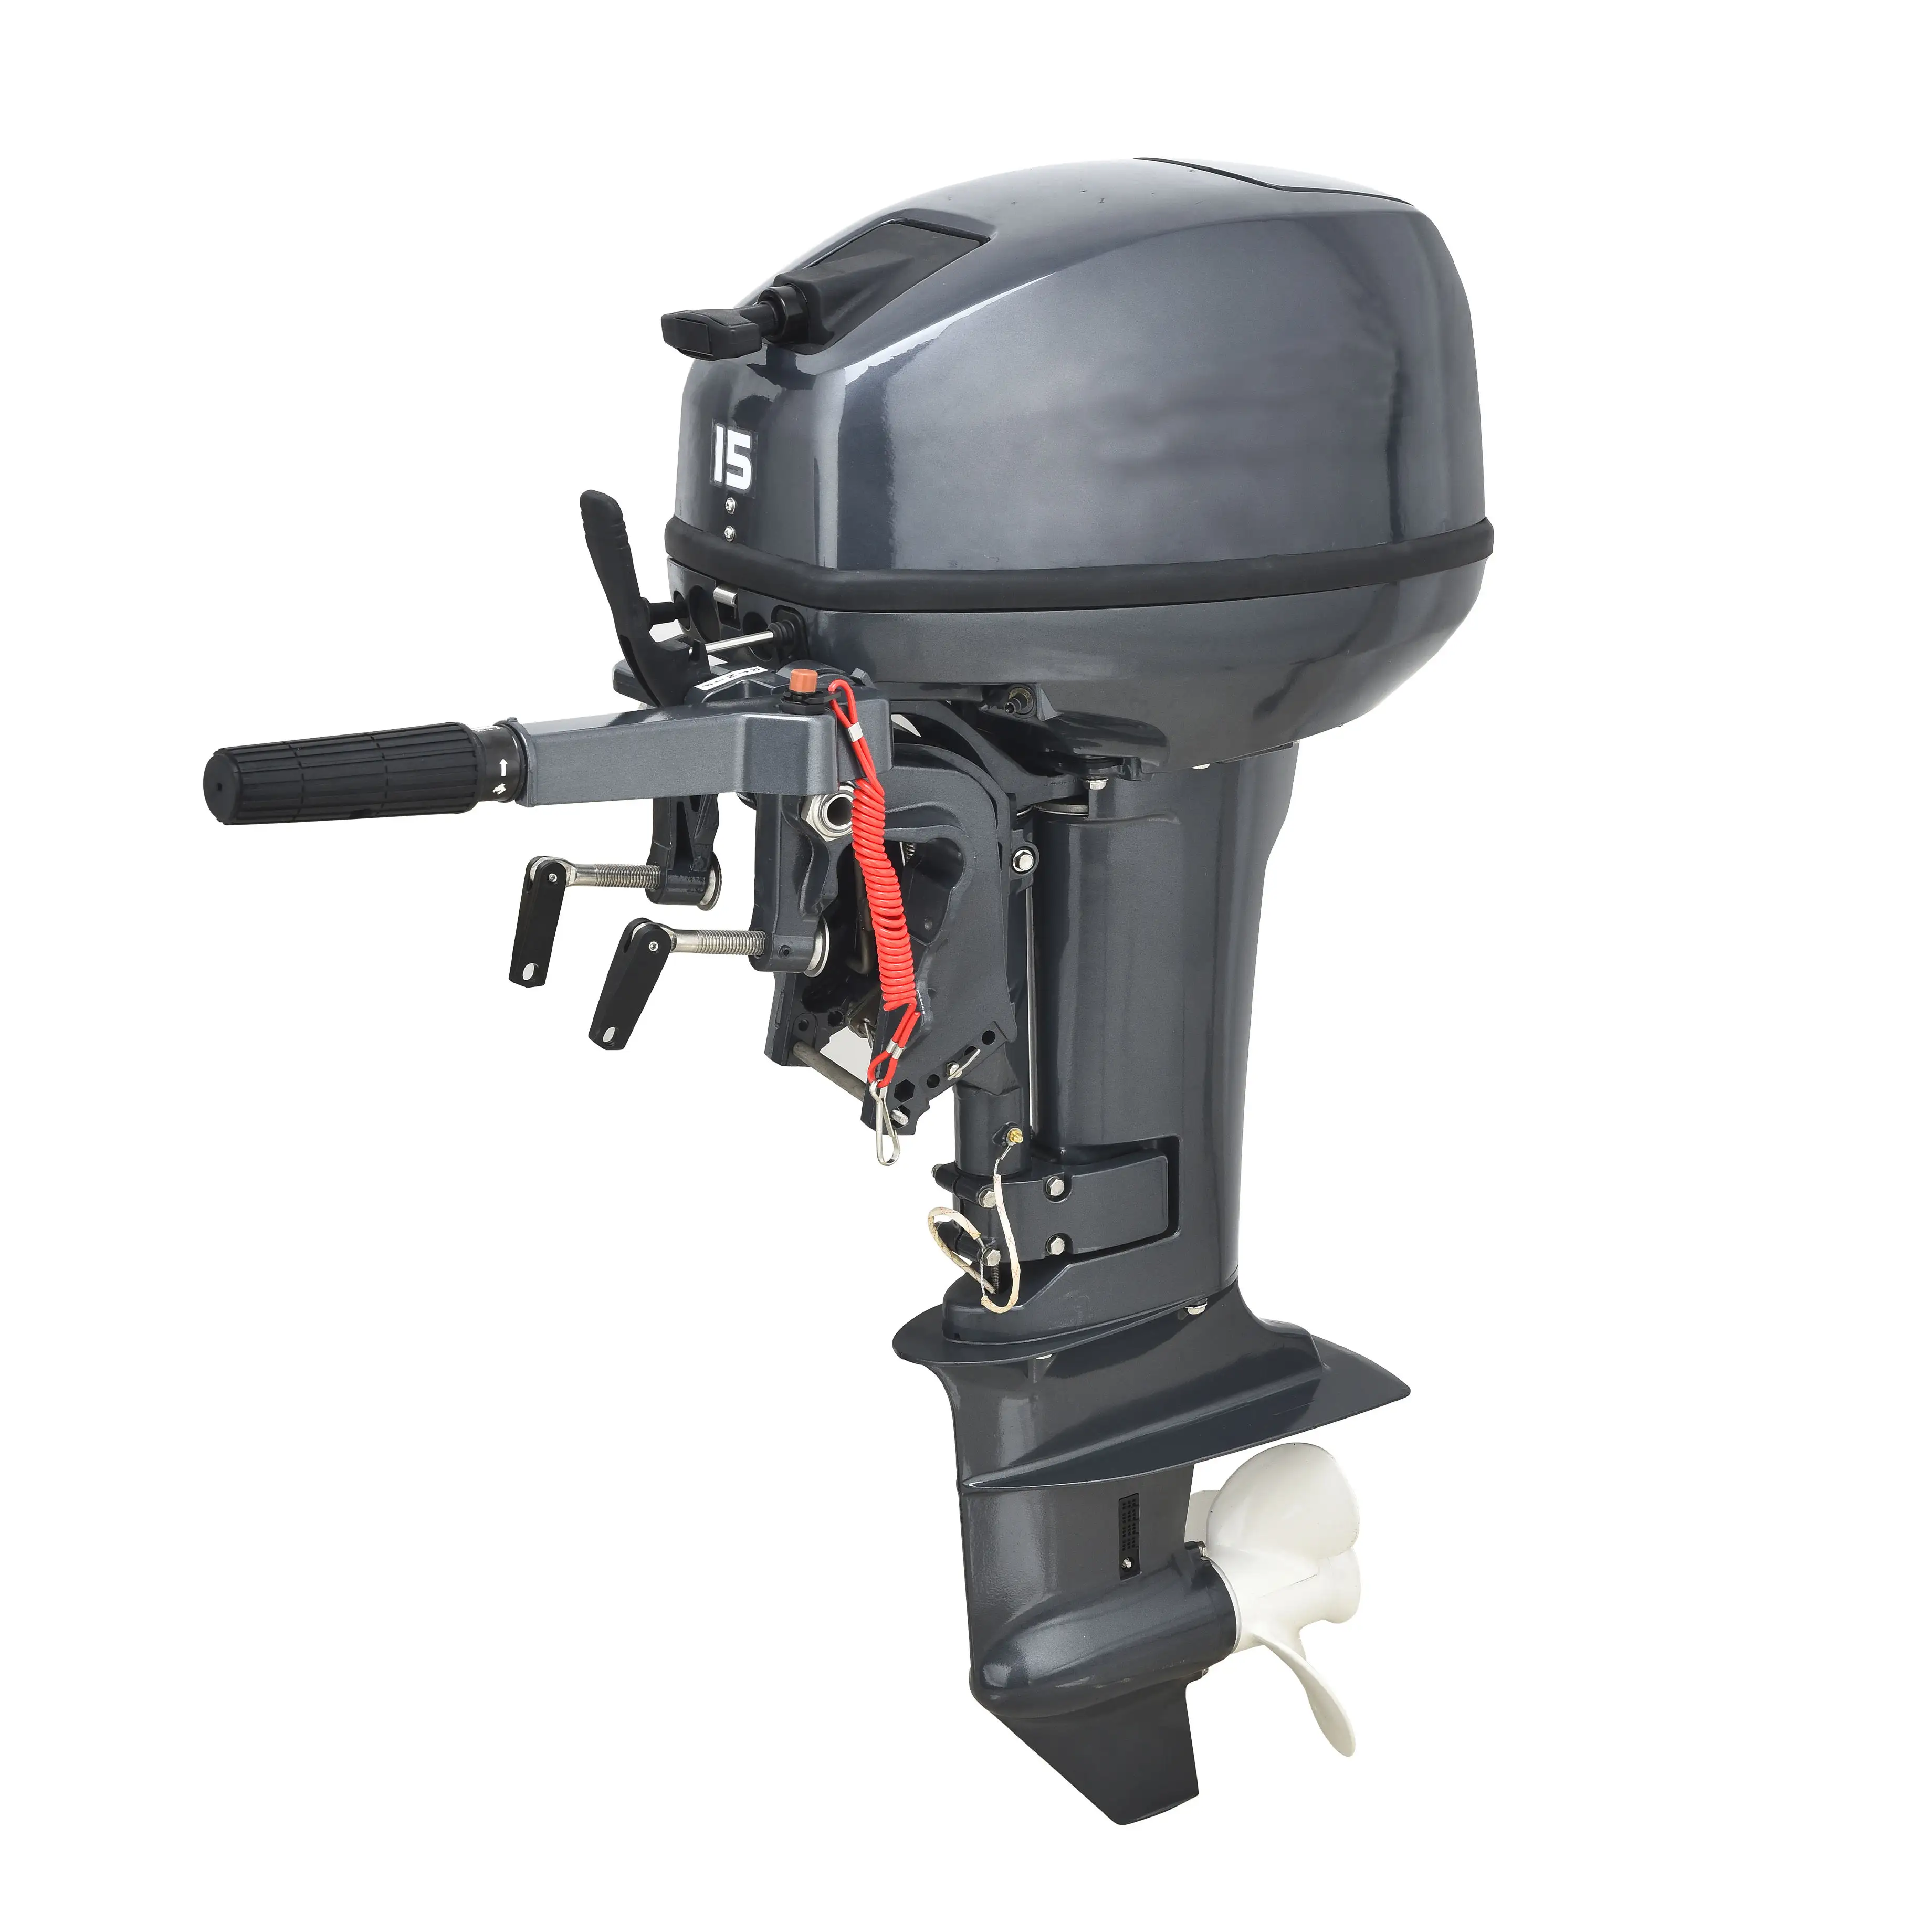 15HP Water-Cooled Outboard Boat Engine with 246CC for Marine Use